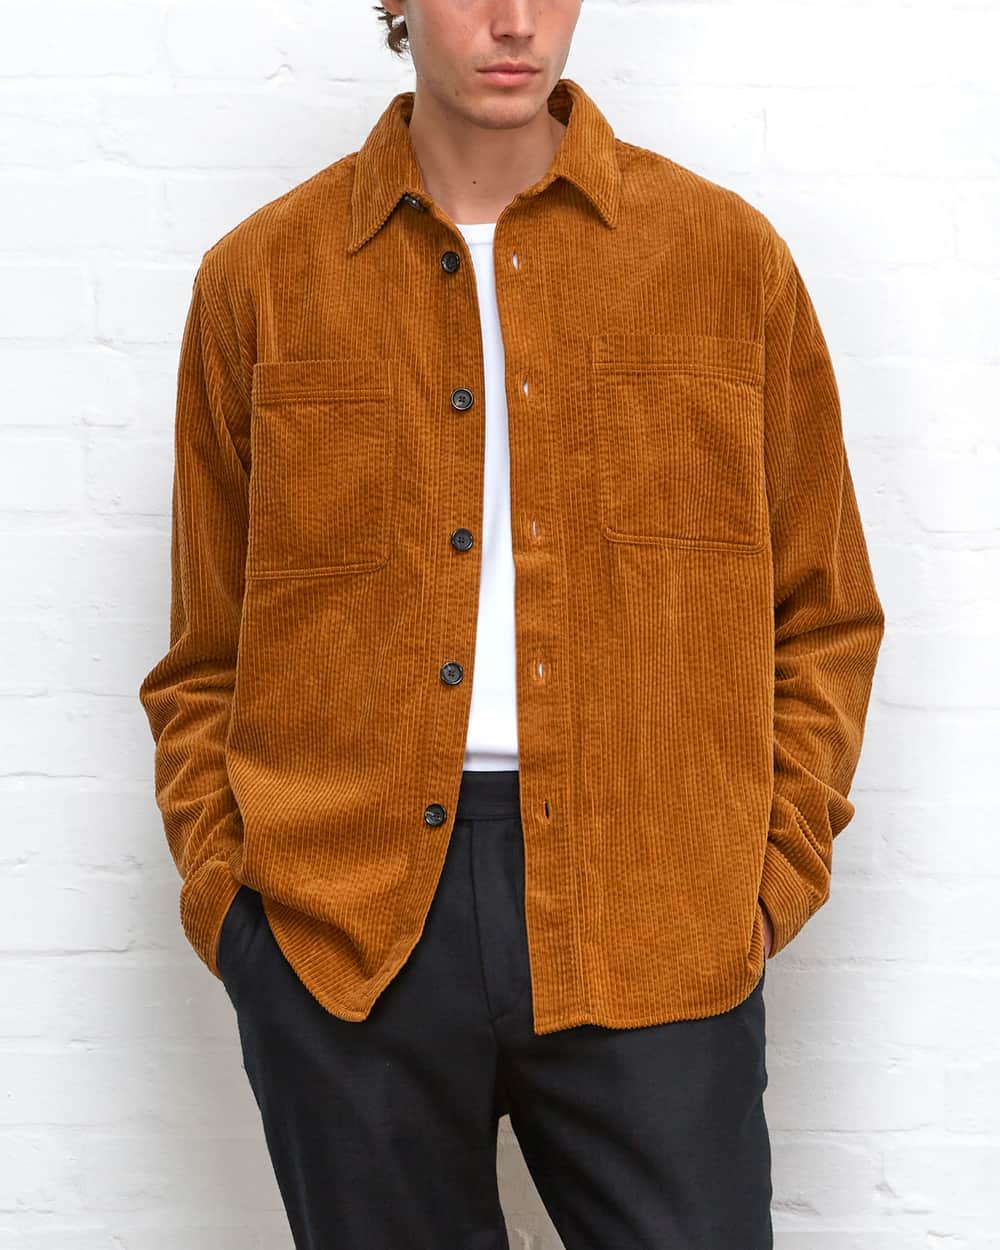 Man wearing a brown/burnt orange corduroy overshirt over a white T-shirt tucked into black tailored pants